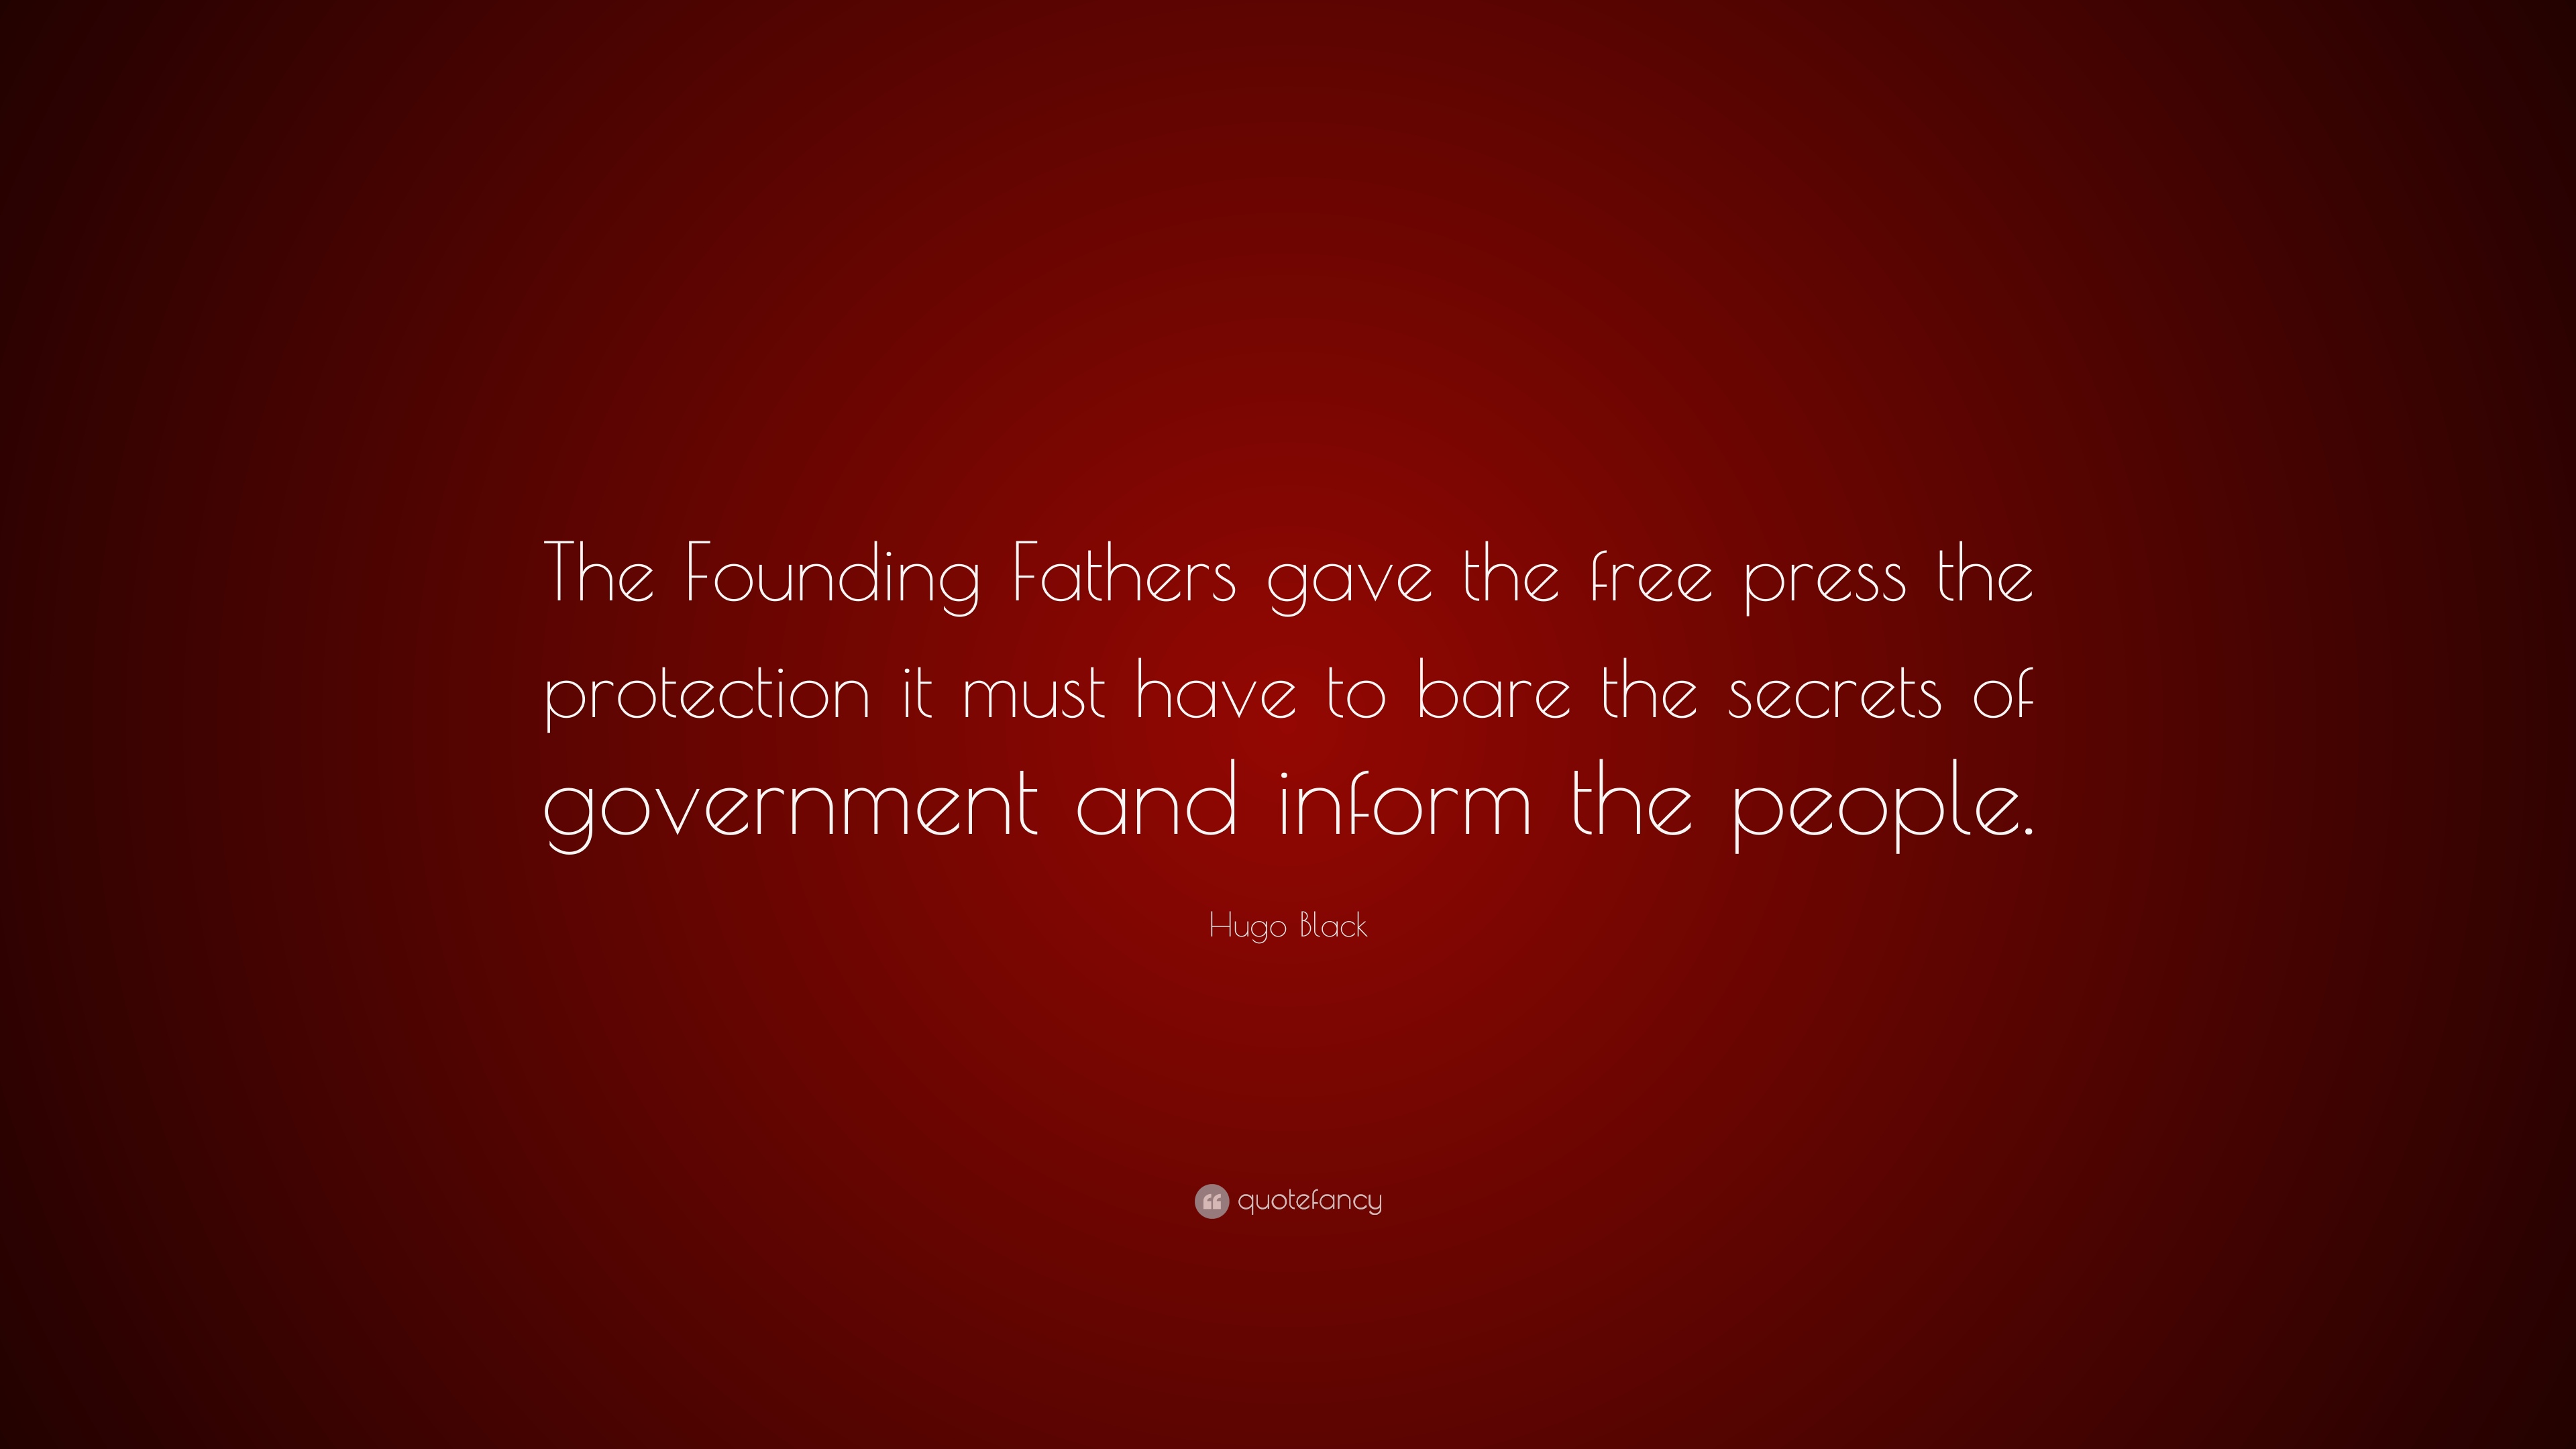 The Founding Fathers gave the free press the protection it must have to bare the secrets of government and inform the people